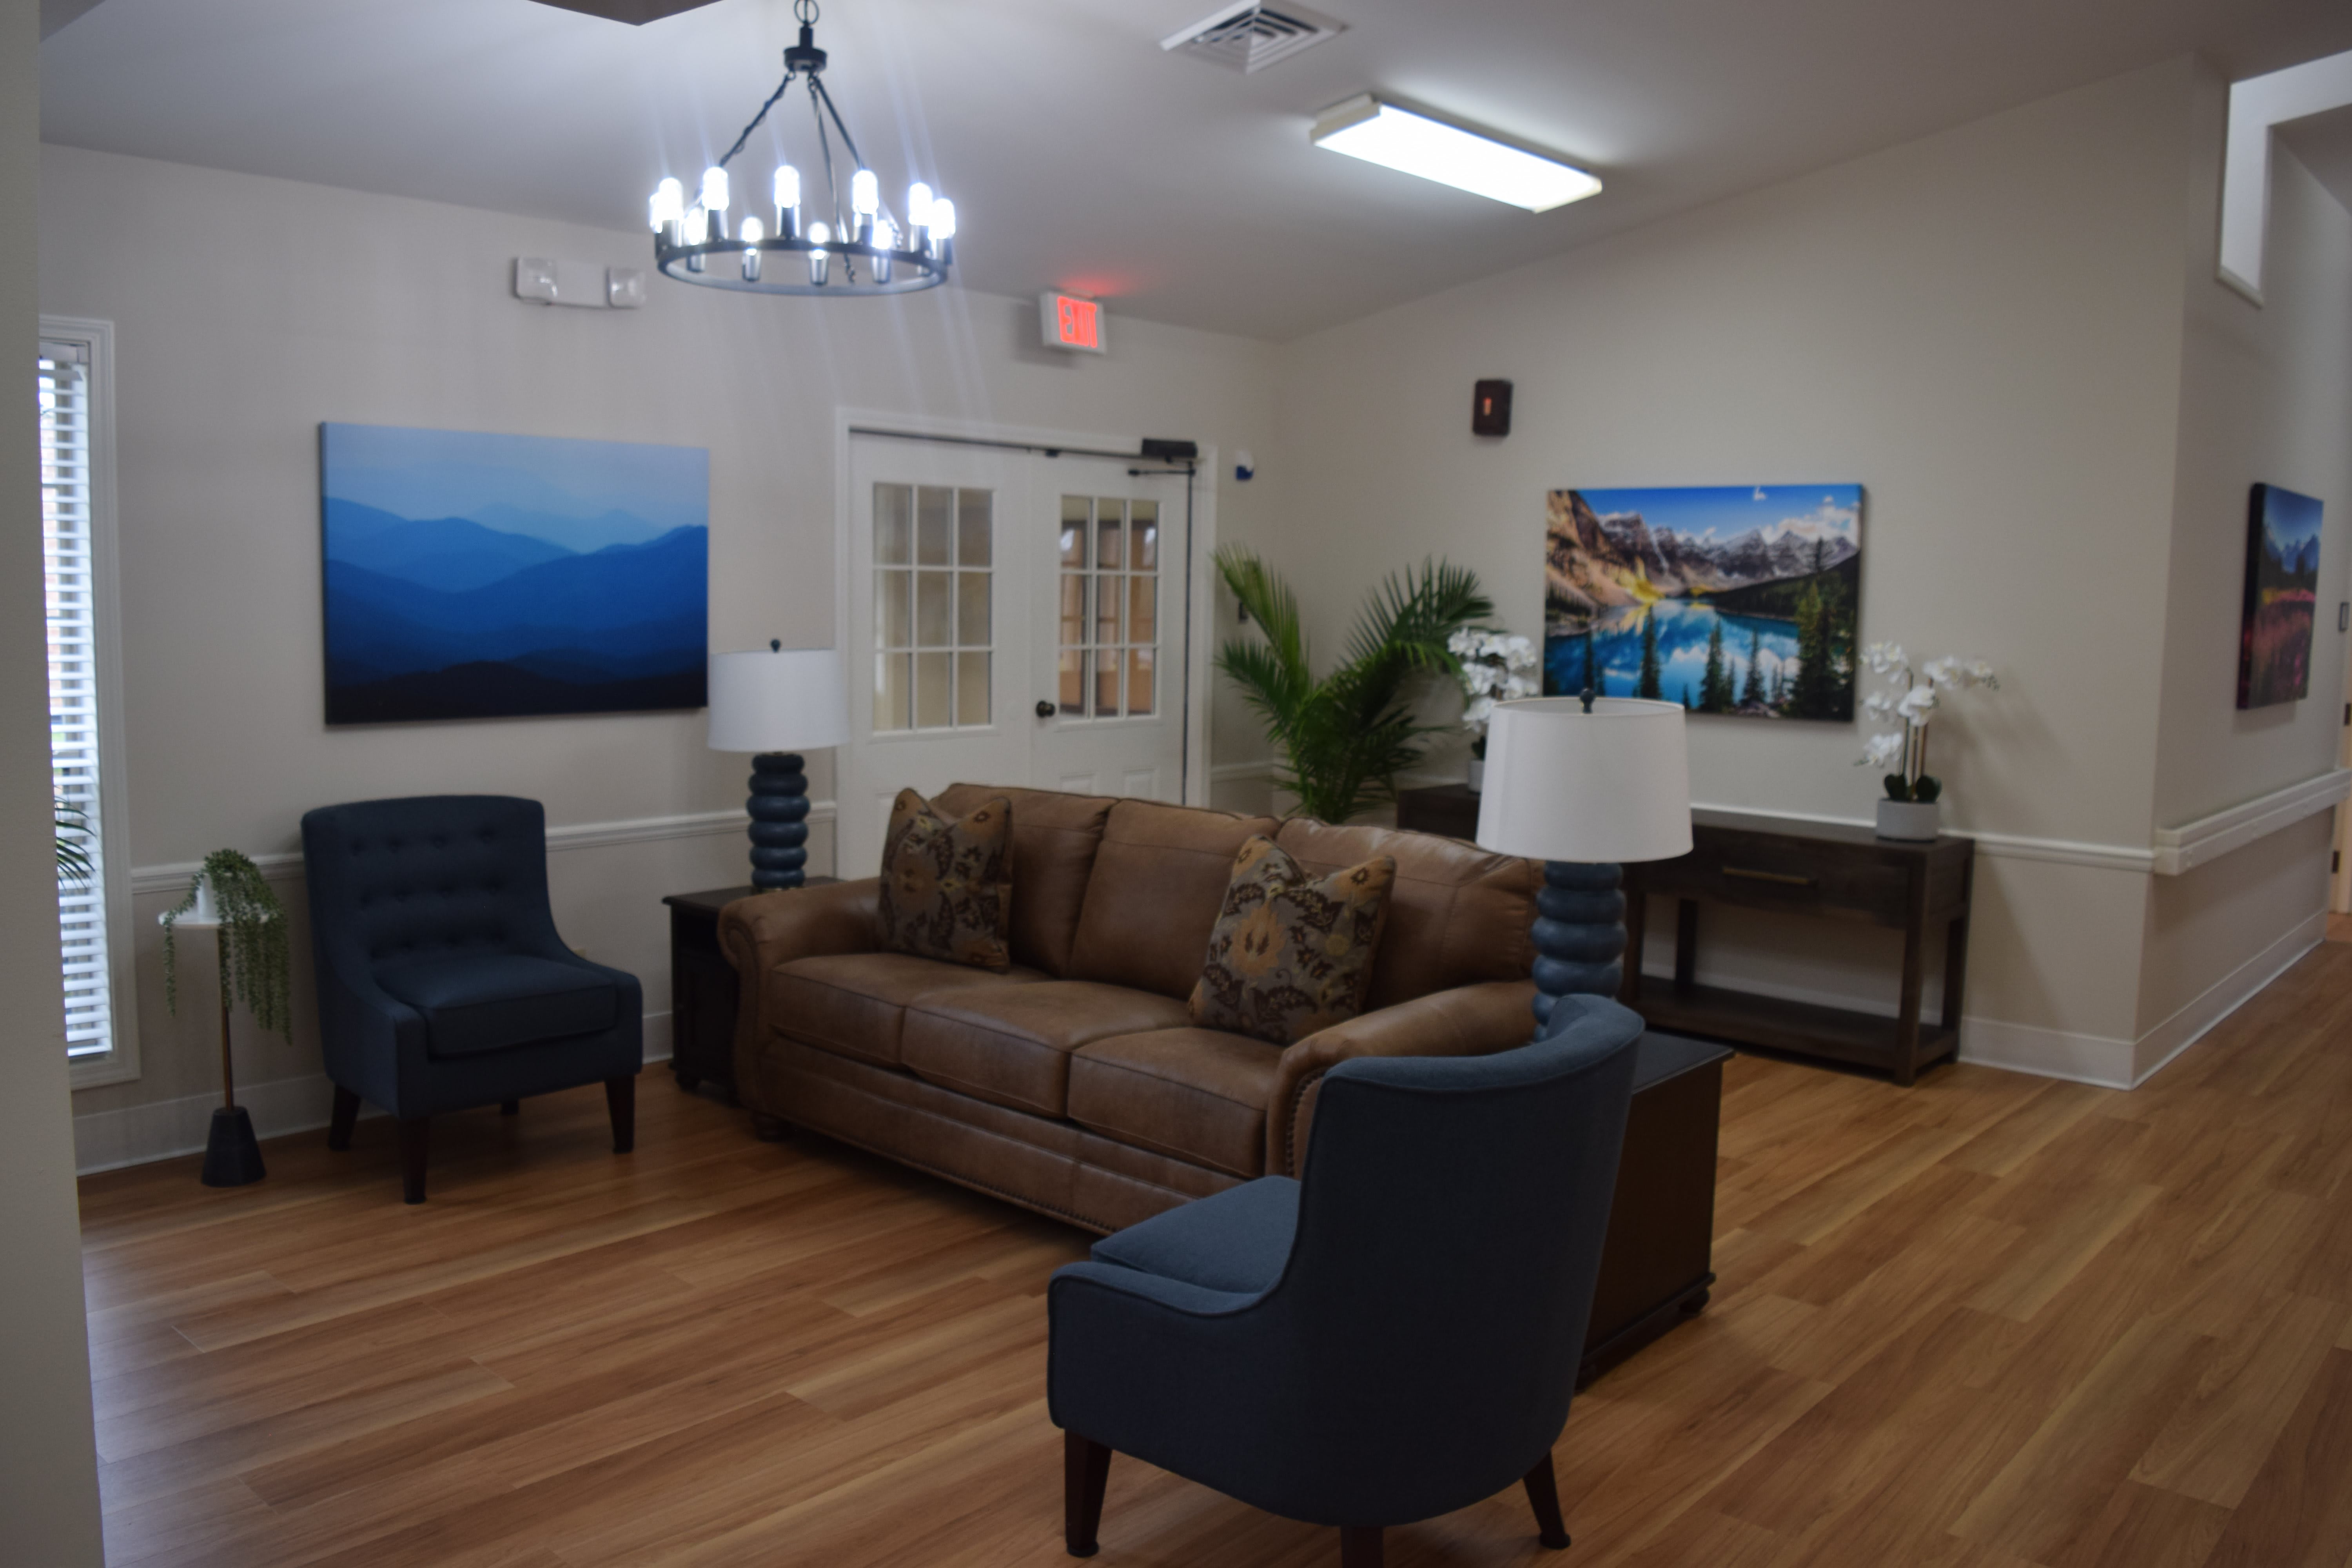 South Knoxville Senior Living